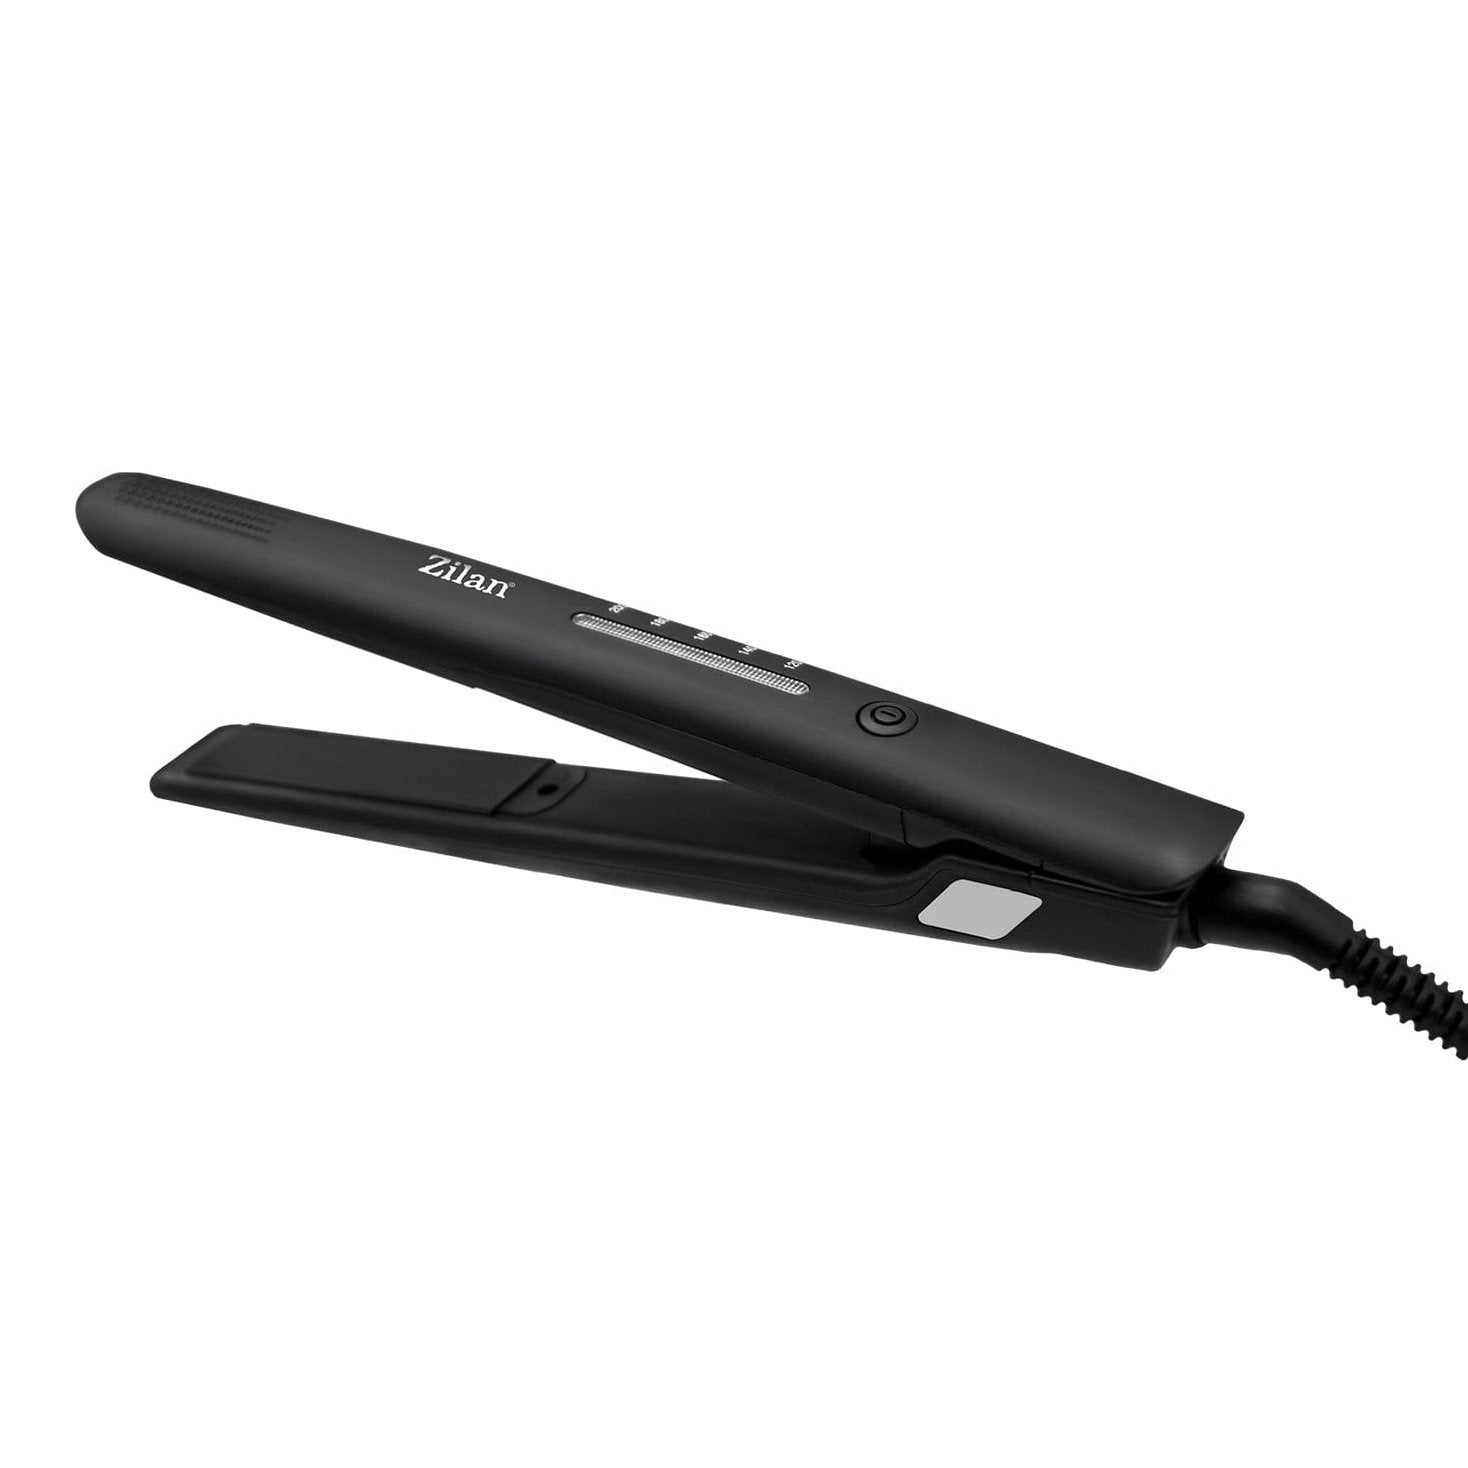 Buy Zilan Hair Straightener - ZLN1260 | Shop at Supply Master Accra, Ghana Home Accessories Buy Tools hardware Building materials